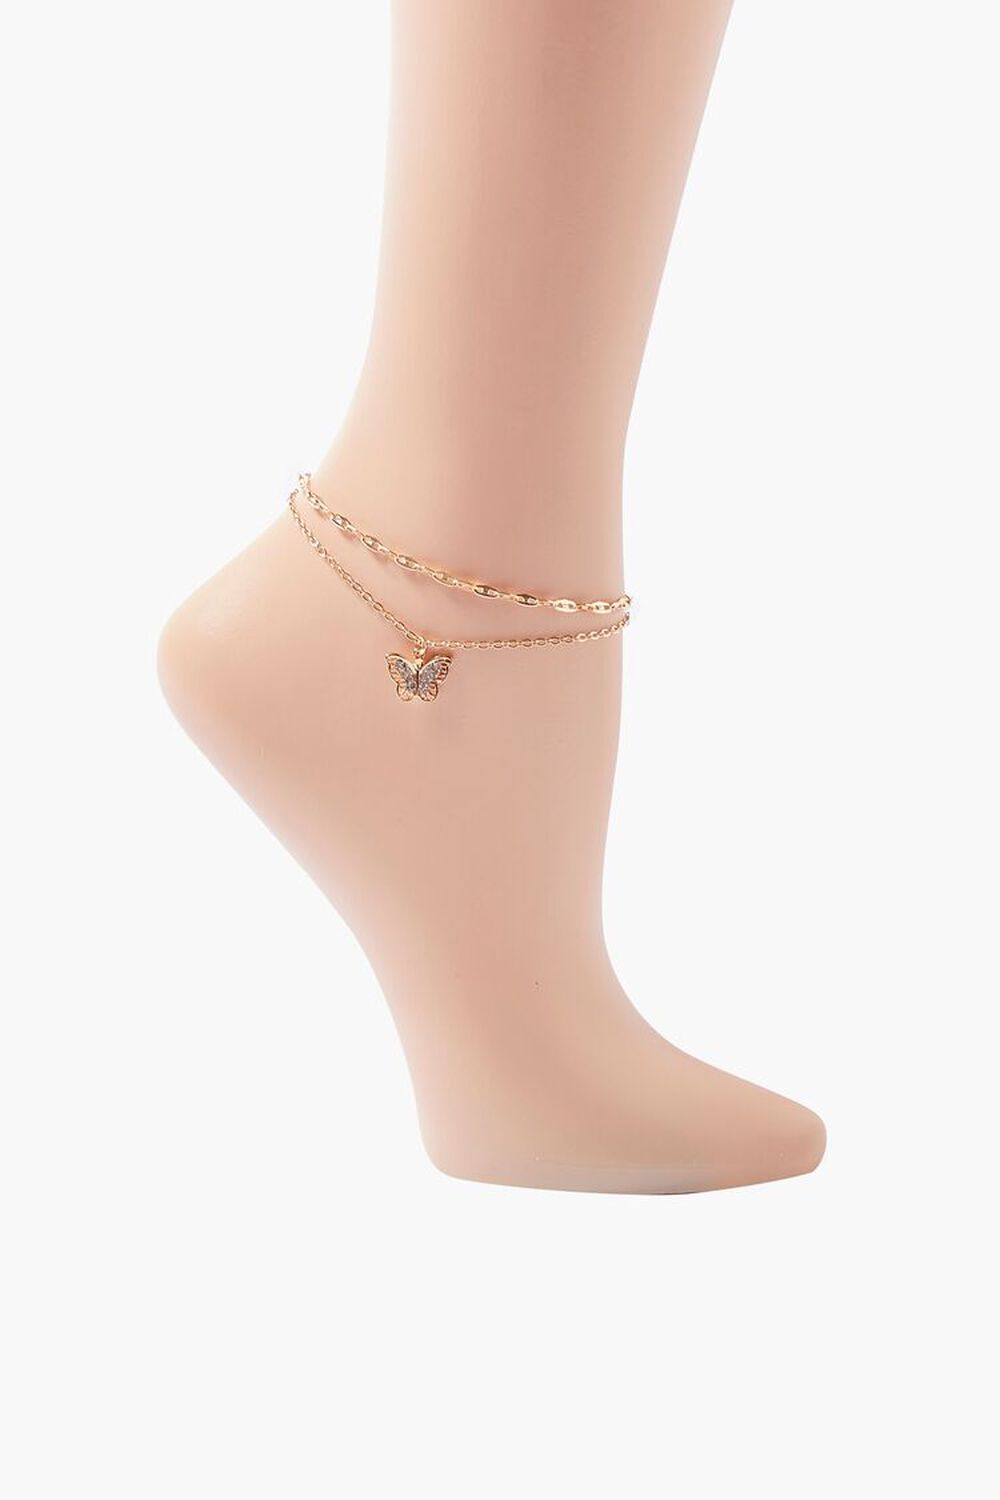 GOLD/CLEAR Butterfly Chain Layered Anklet, image 1